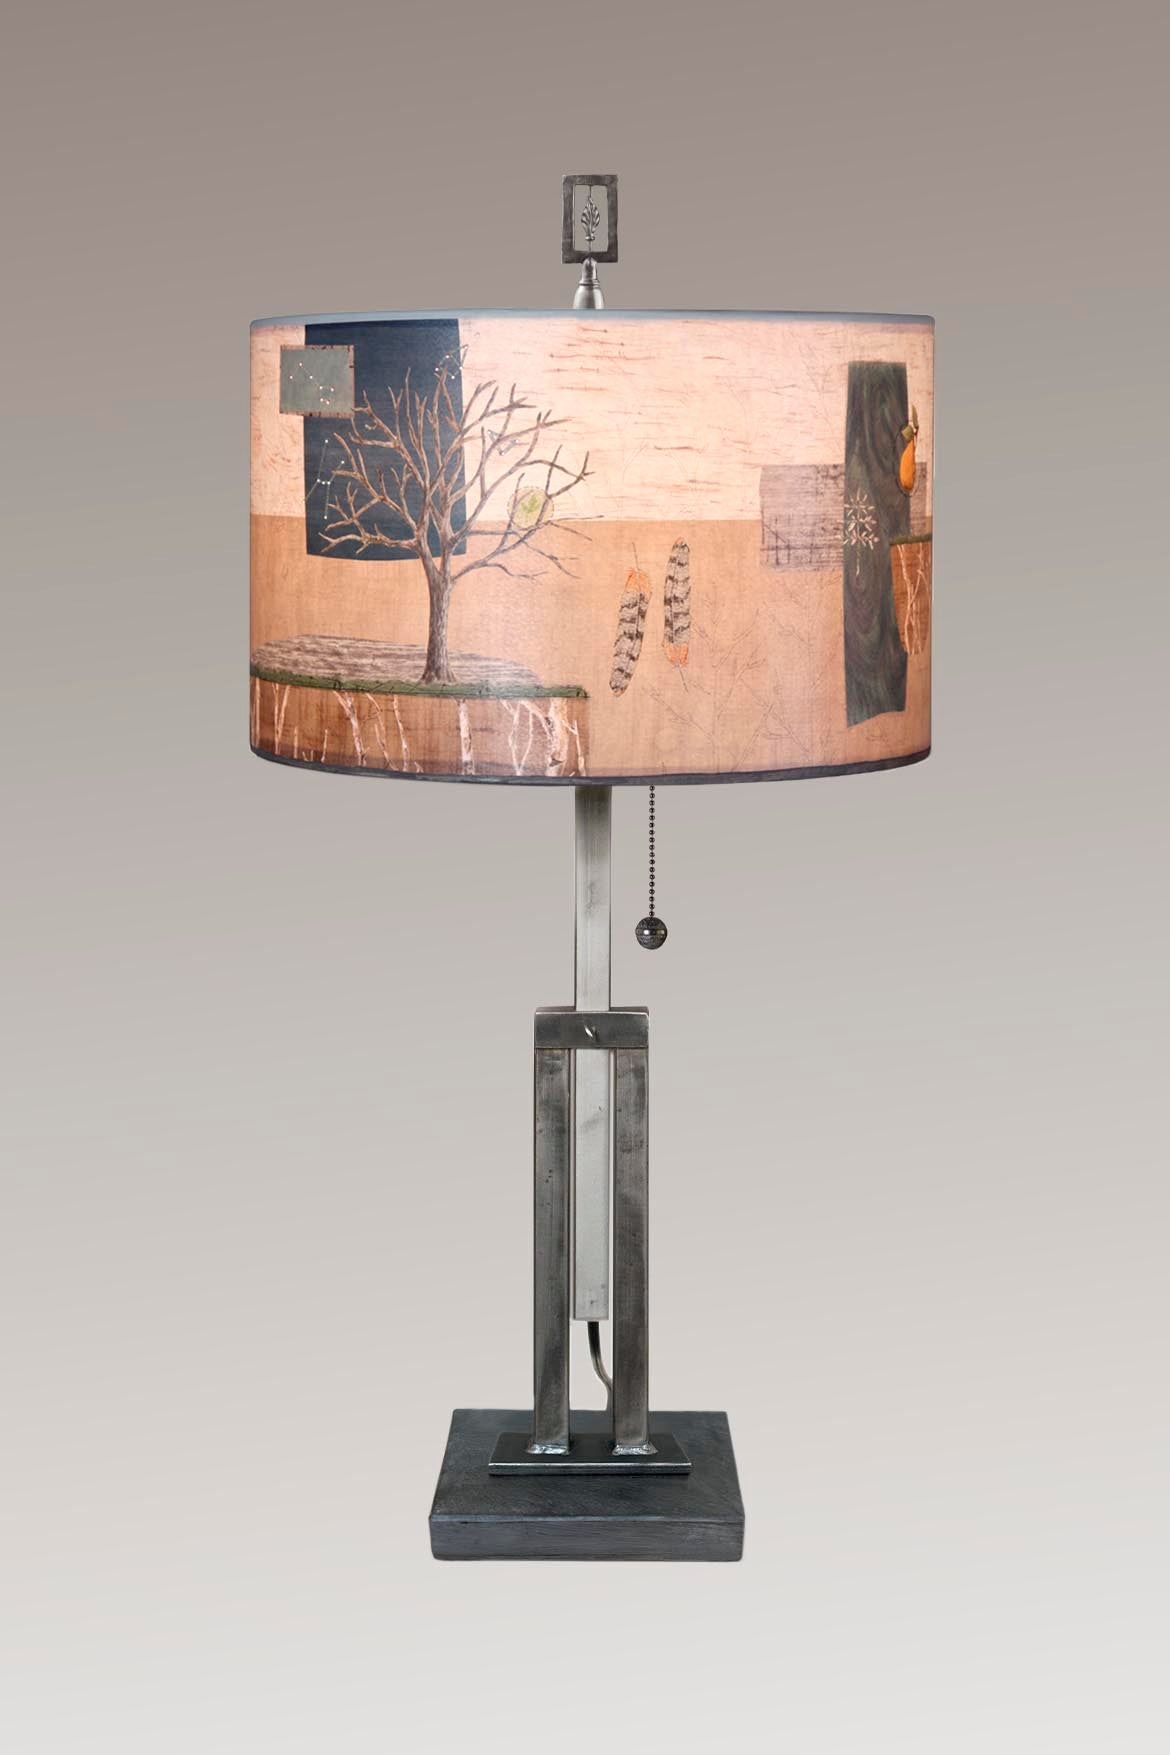 Janna Ugone & Co Table Lamp Adjustable-Height Steel Table Lamp with Large Drum Shade in Wander in Drift